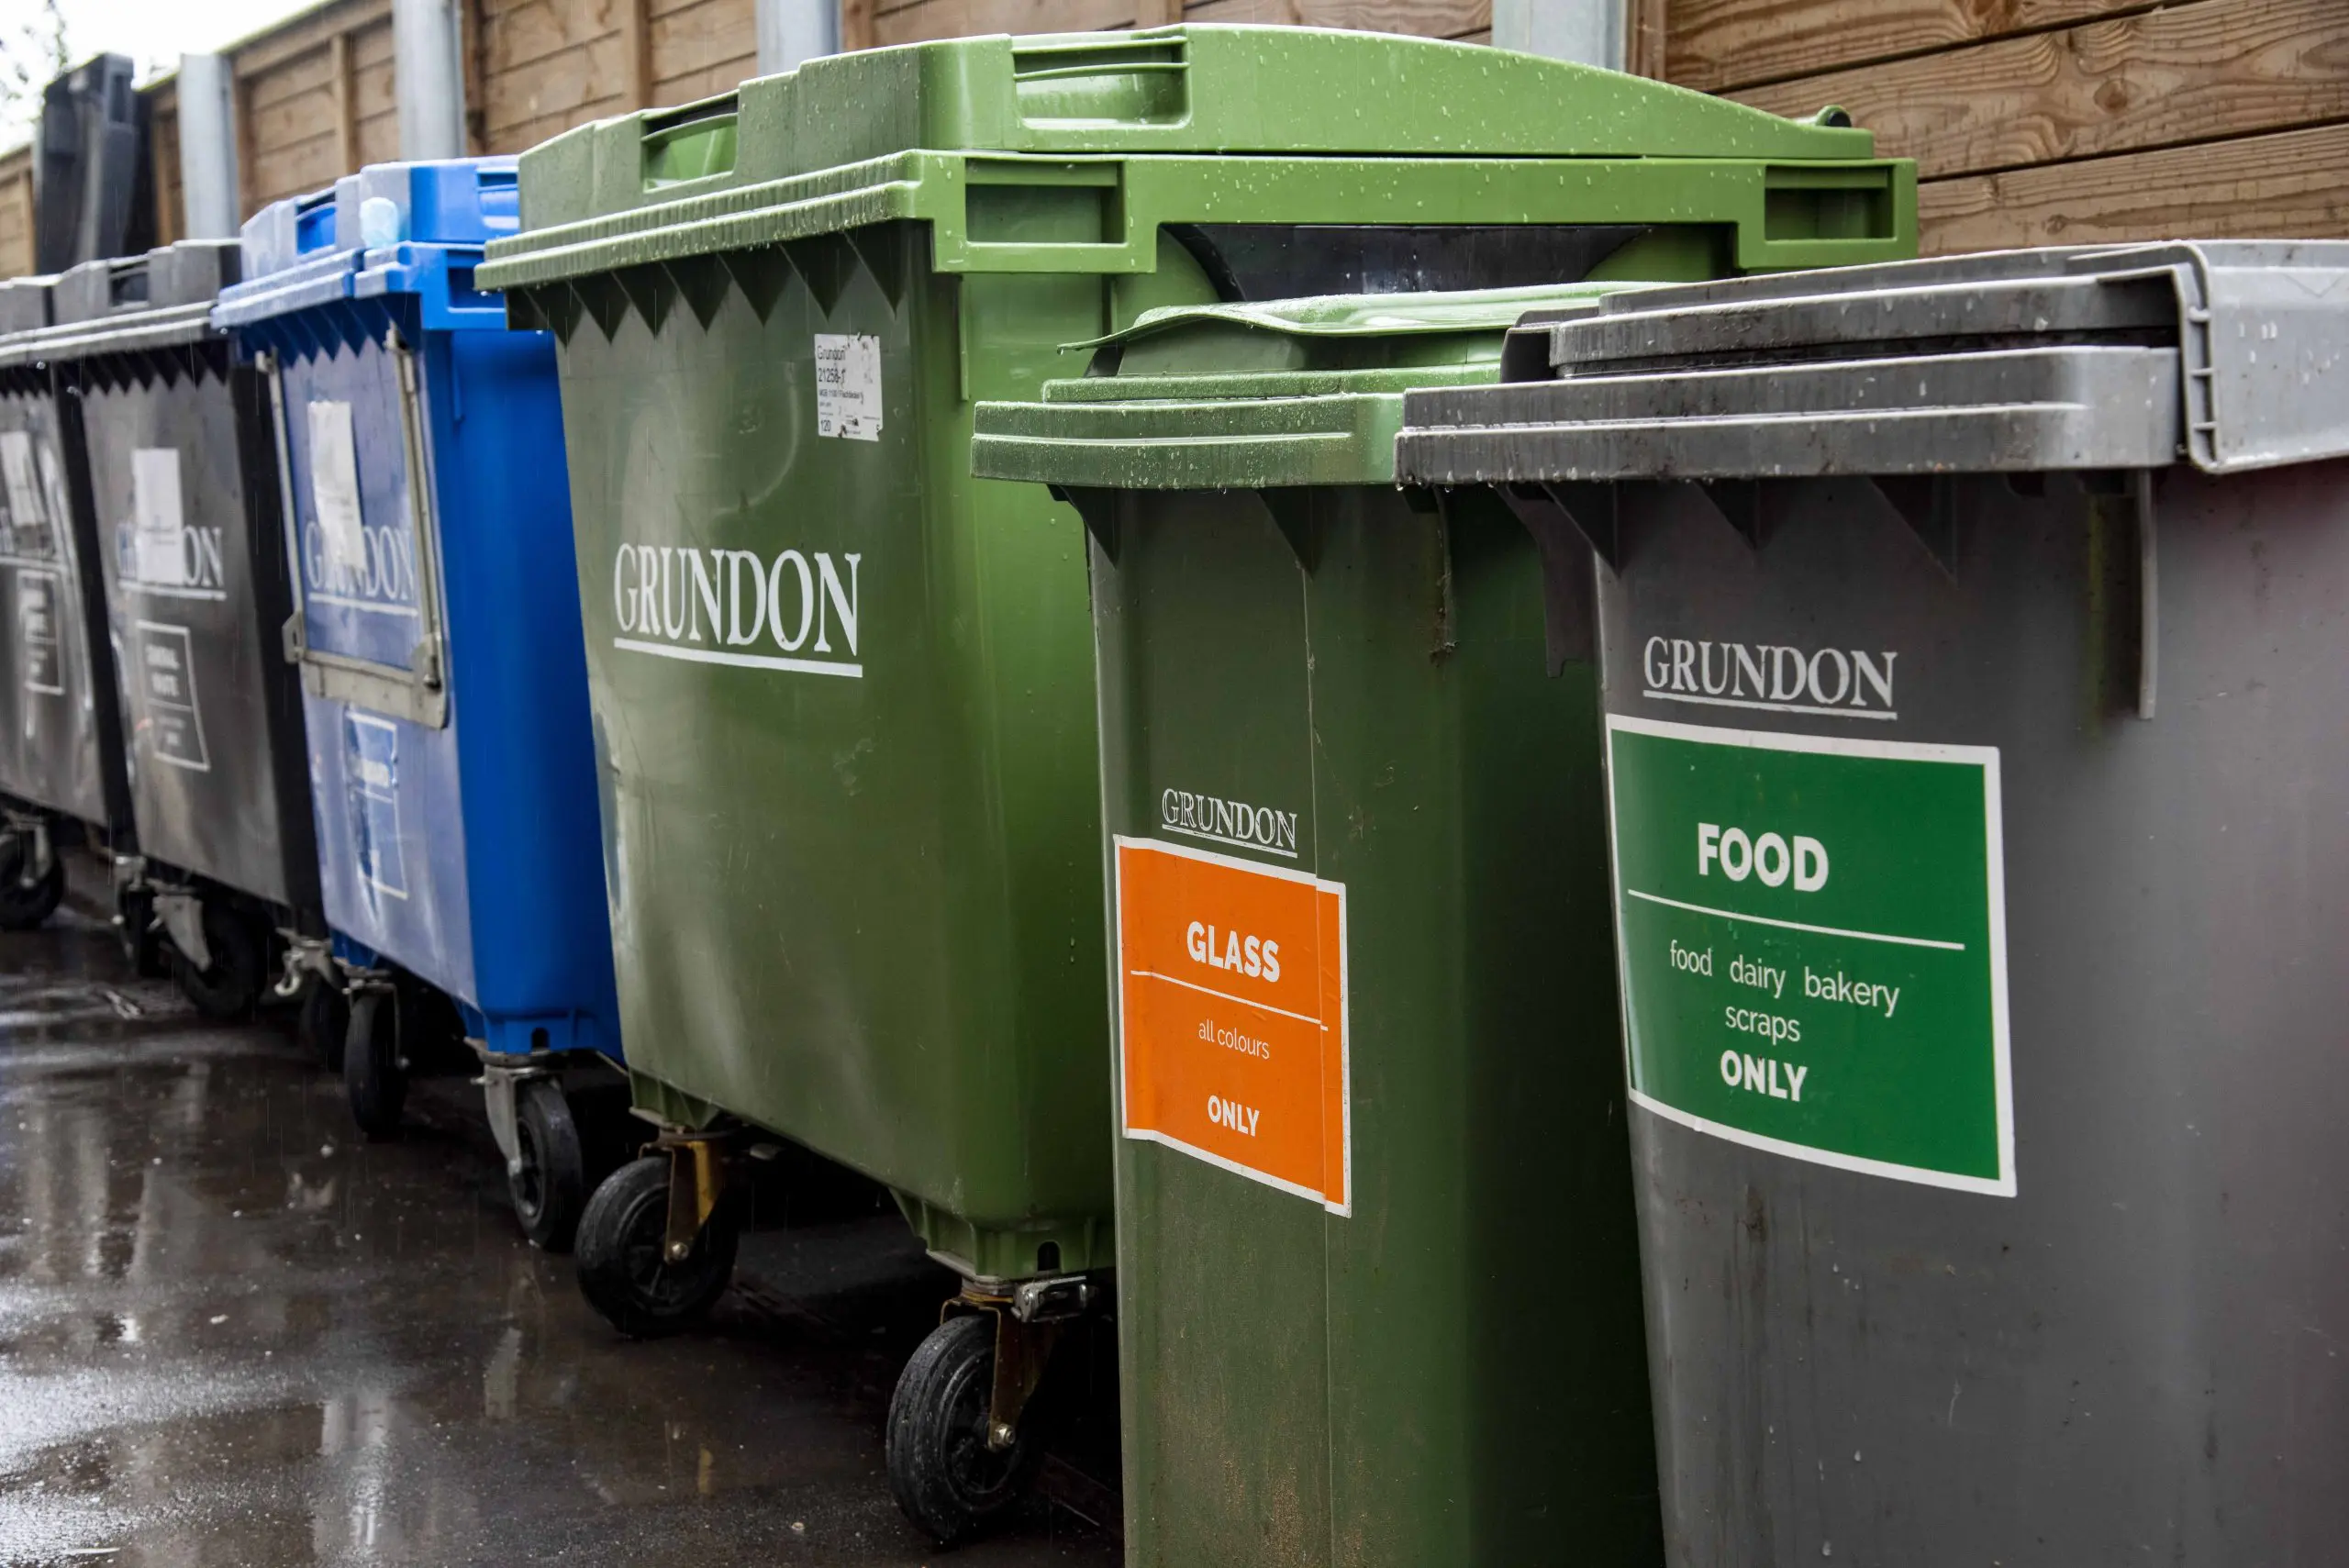 All the Grundon bins are clearly labelled